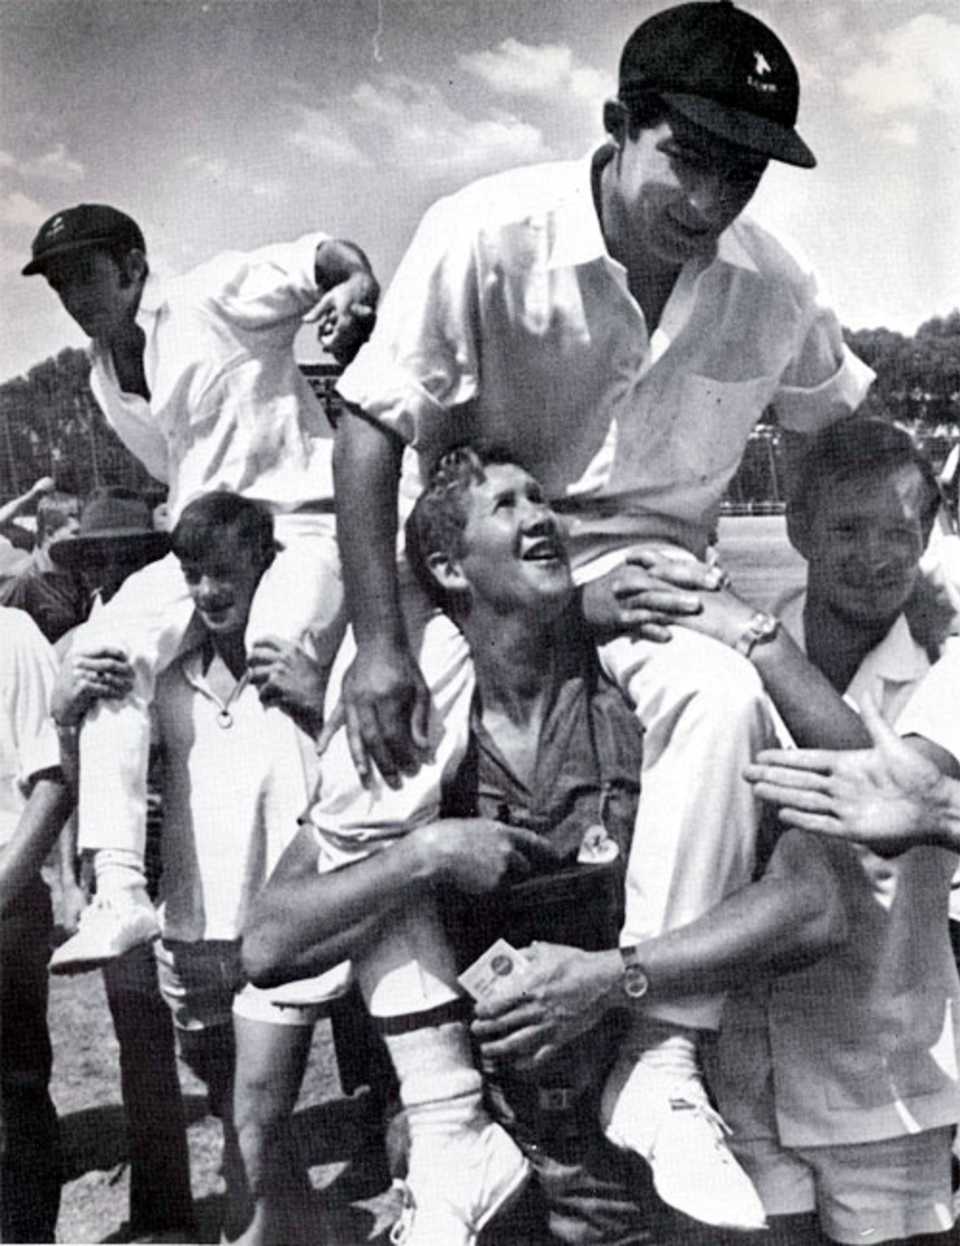 Ali Bacher is chaired from the field after the win in Johannesburg